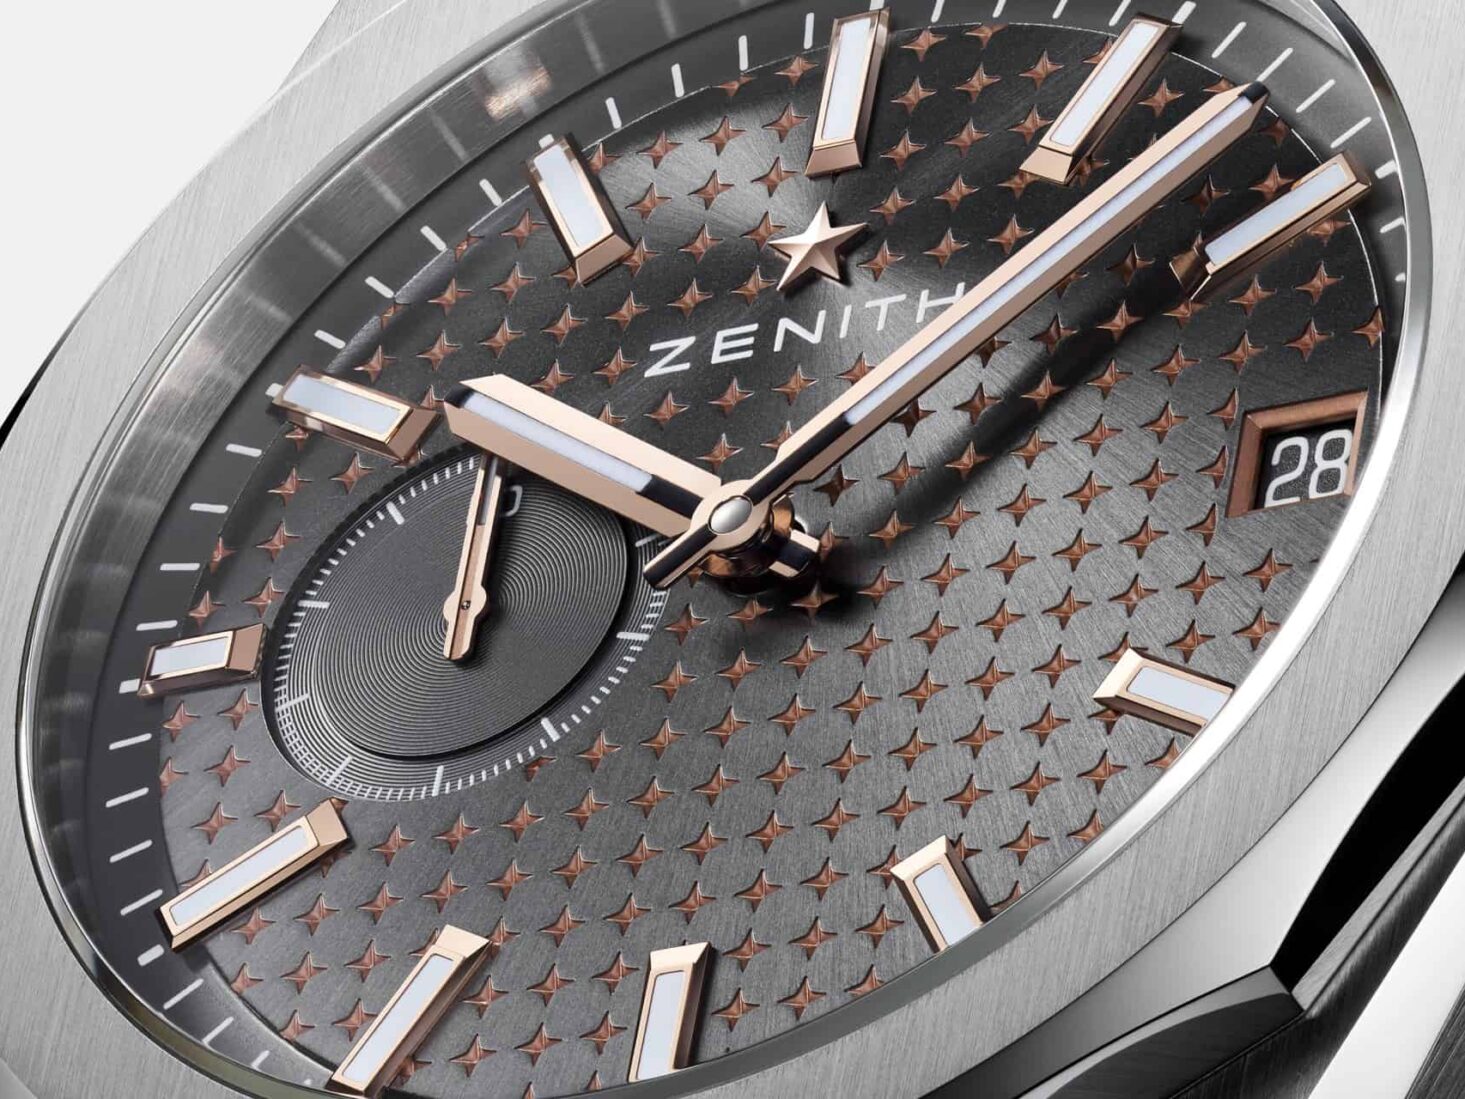 The Zenith Defy Skyline Boutique Edition is an absolute stunner